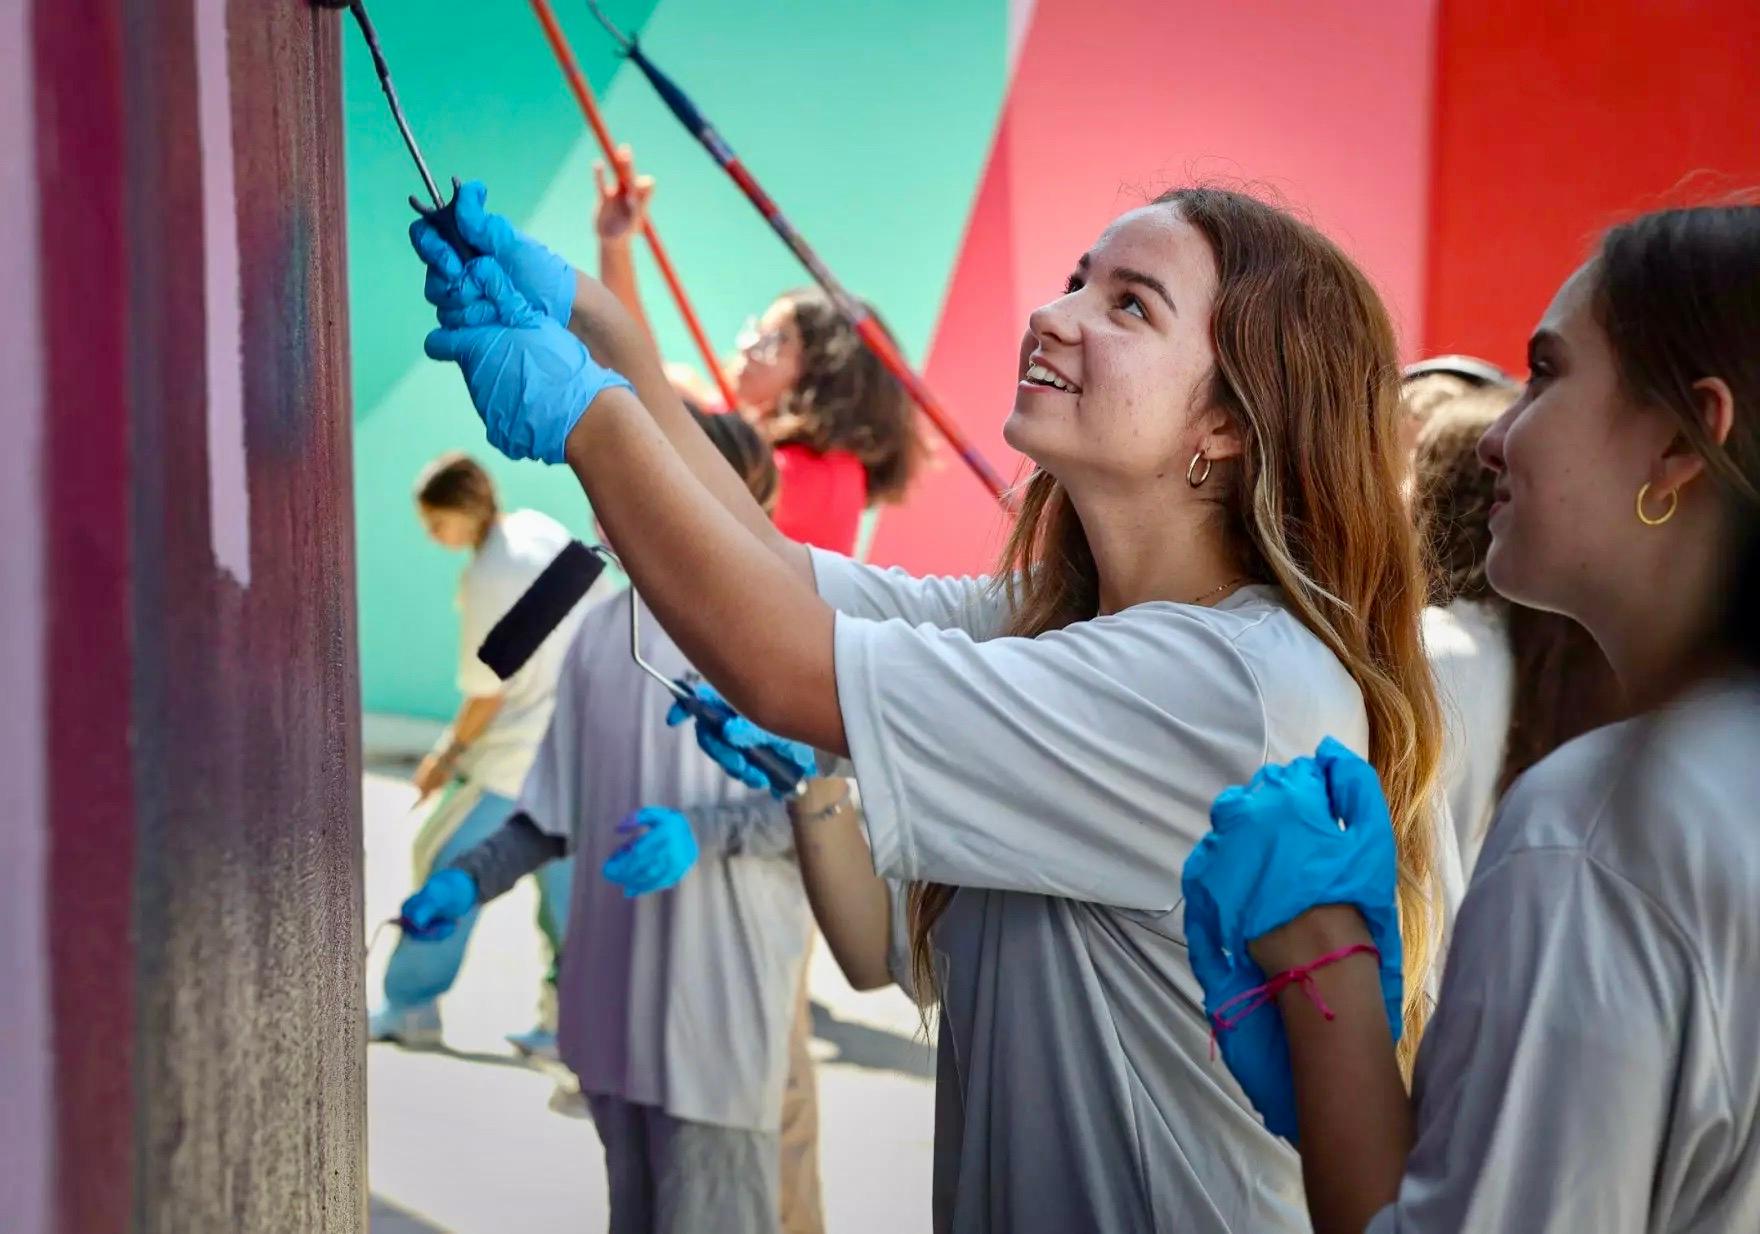 close up of two girls wearing white shirts and blue gloves looking up and painting